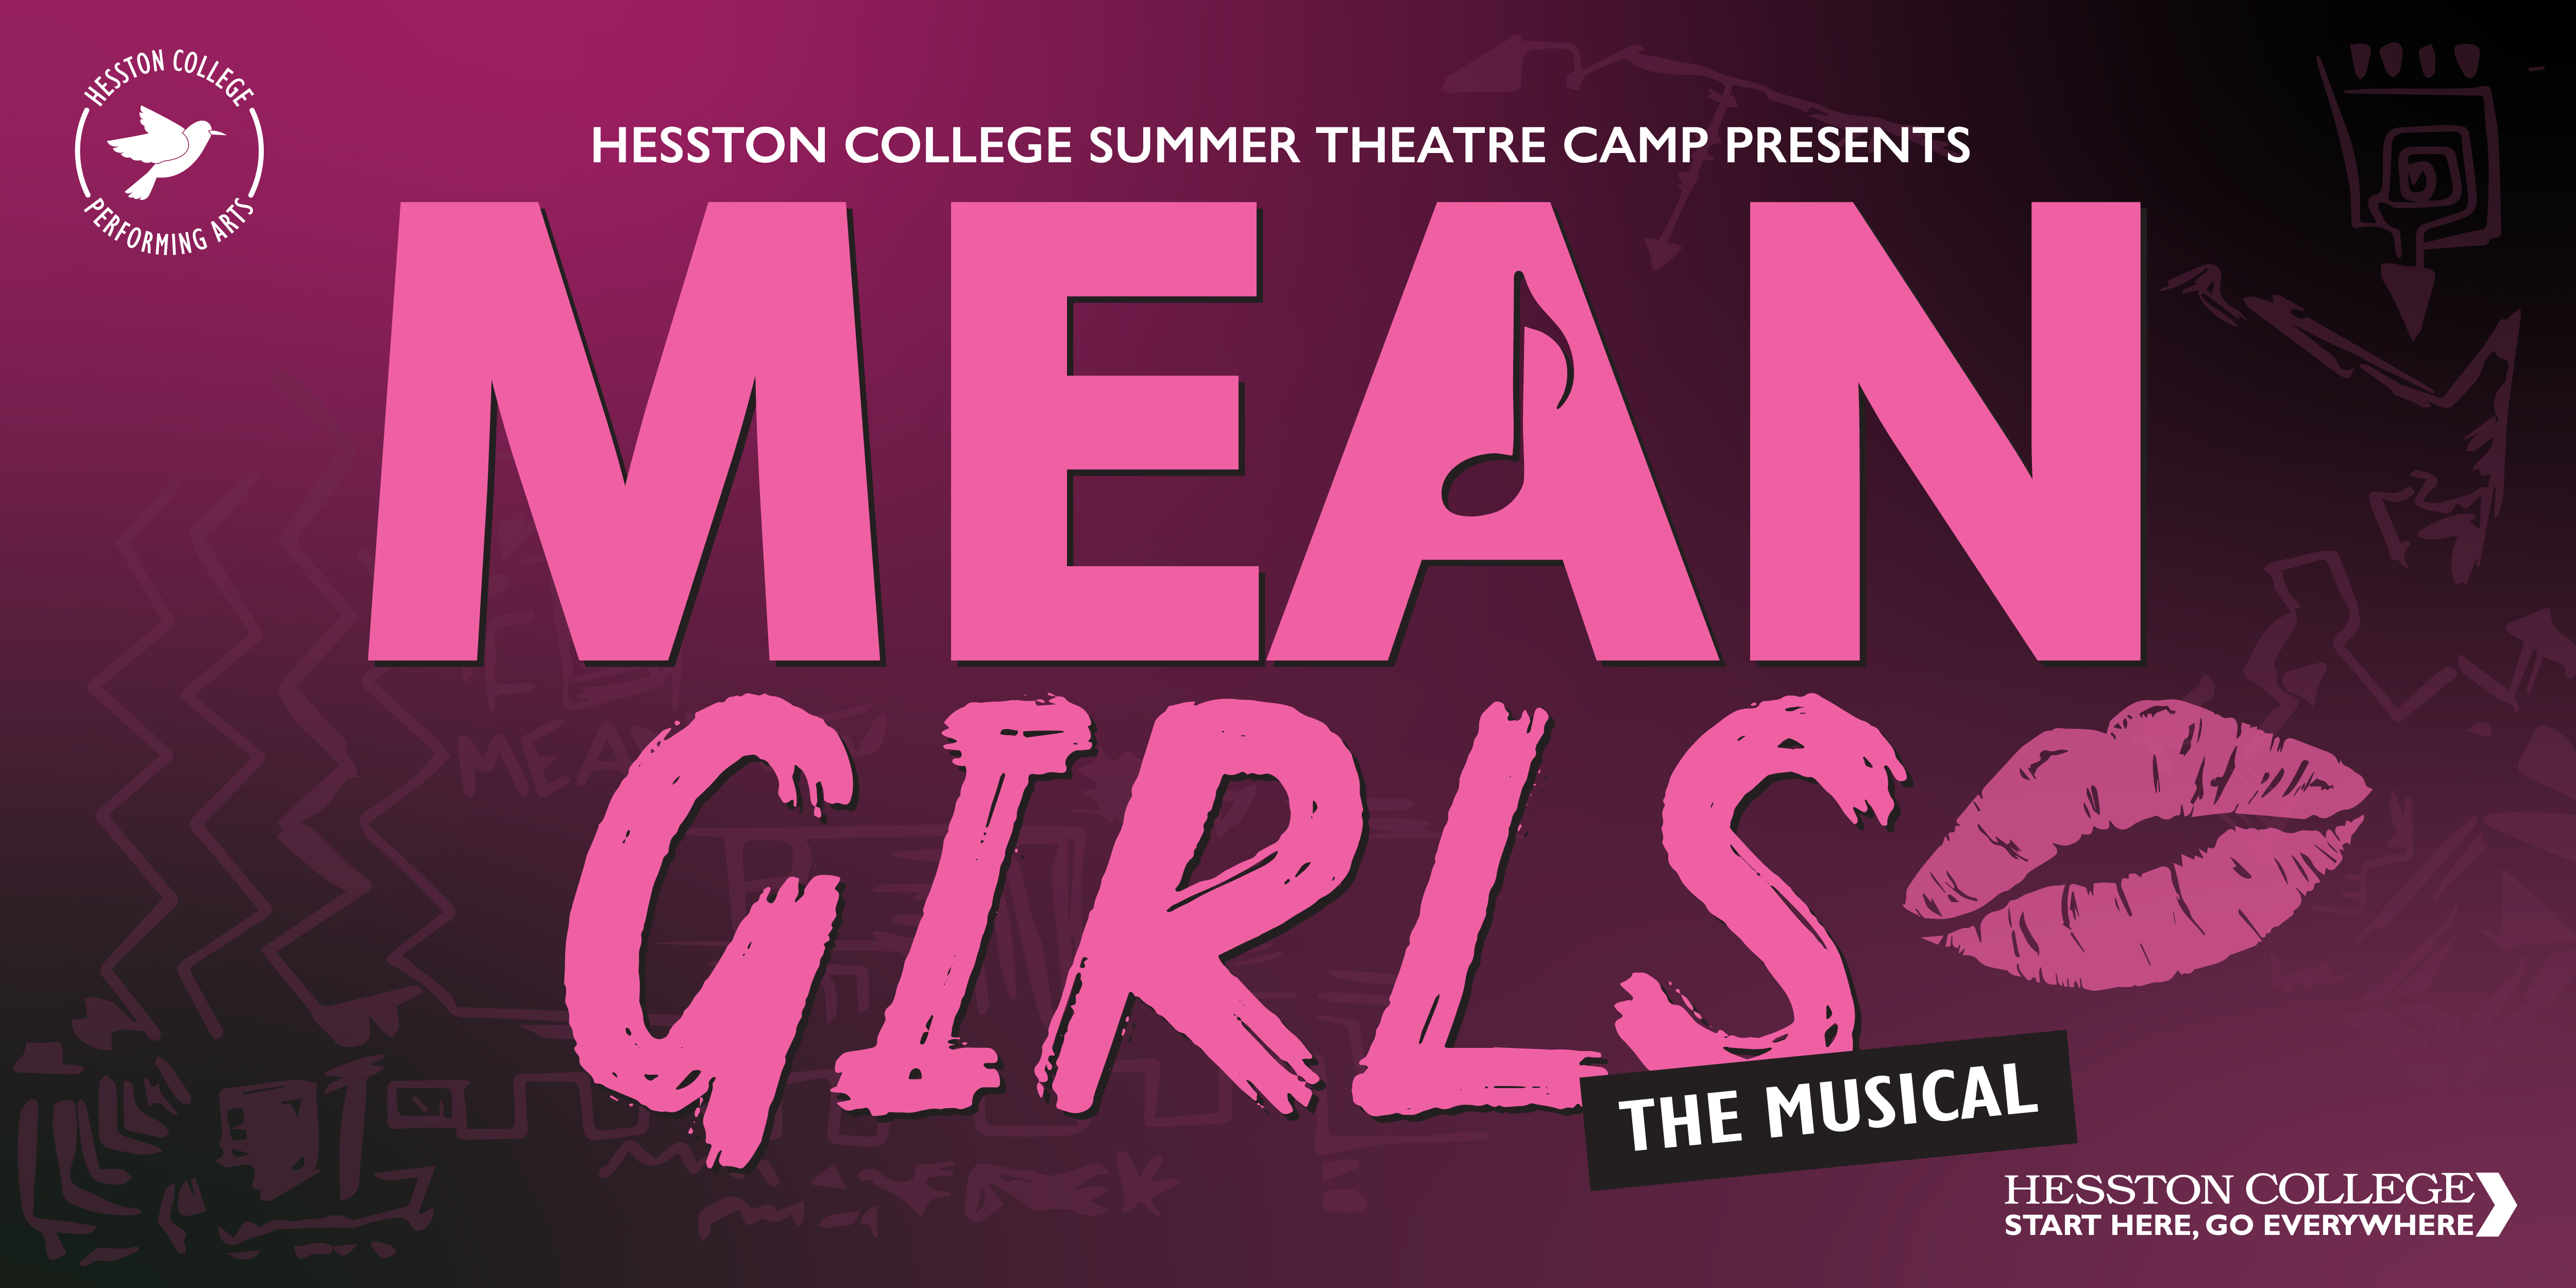 Hesston College summer theatre camp presents Mean Girls the musical.